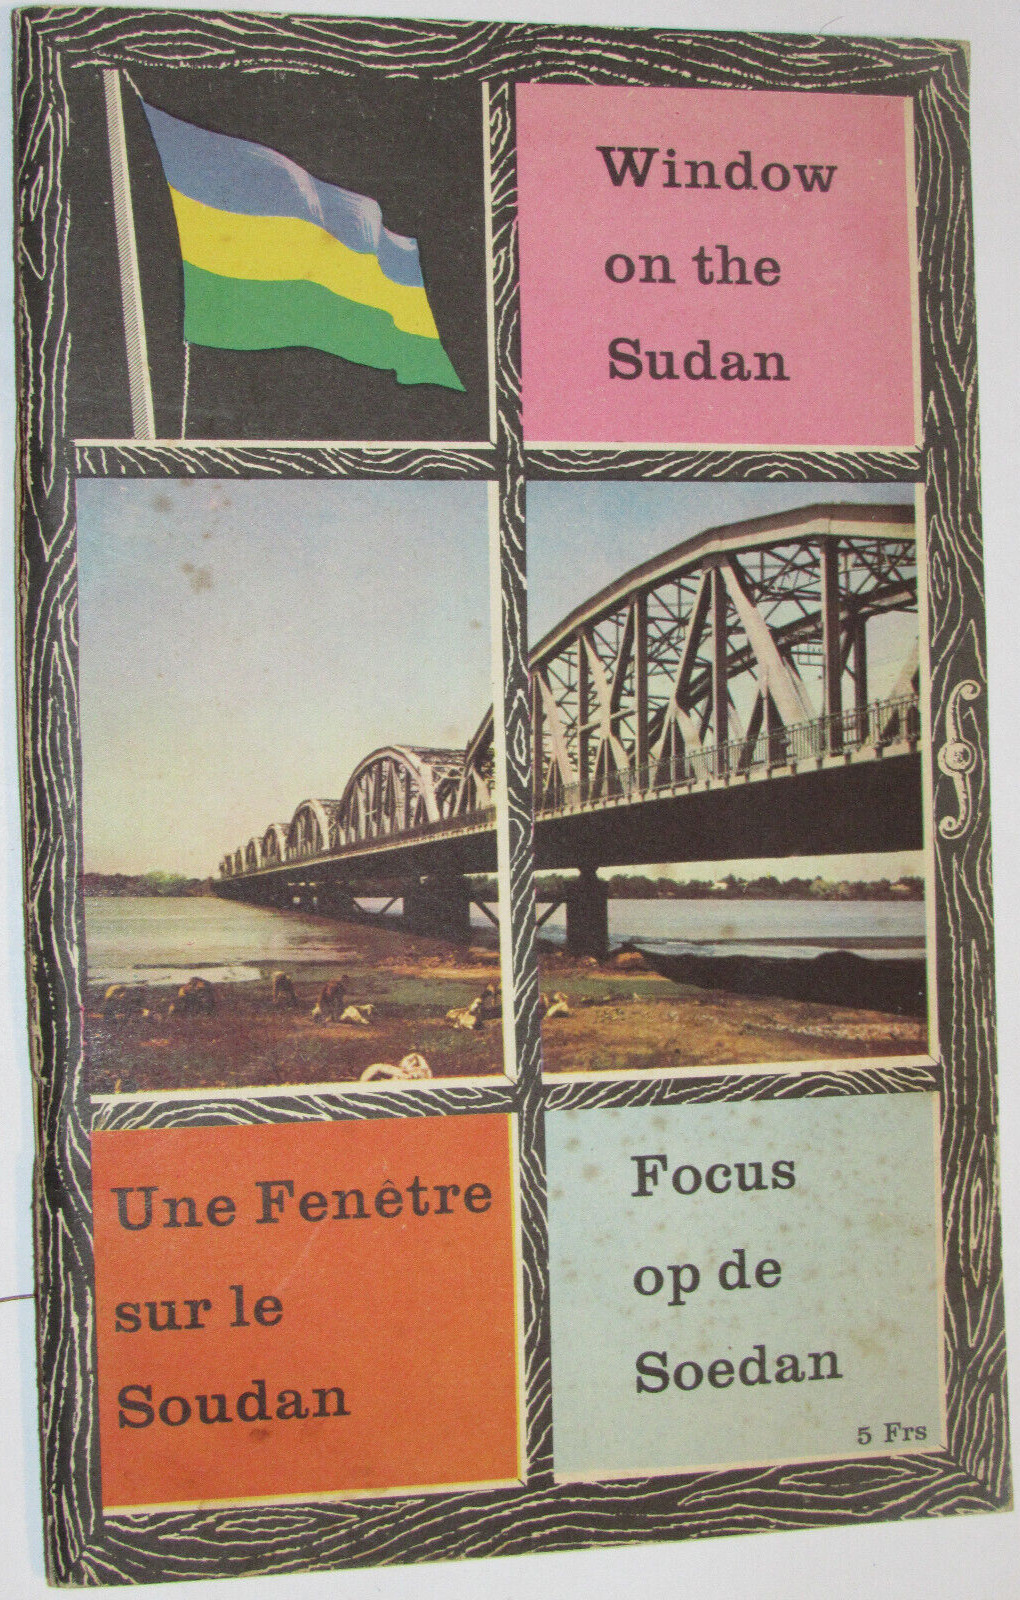 VINTAGE 1958 BOOK 'WINDOW ON THE SUDAN' PRODUCTS/PEOPLE/AGRICULTURE/ADVERTISING